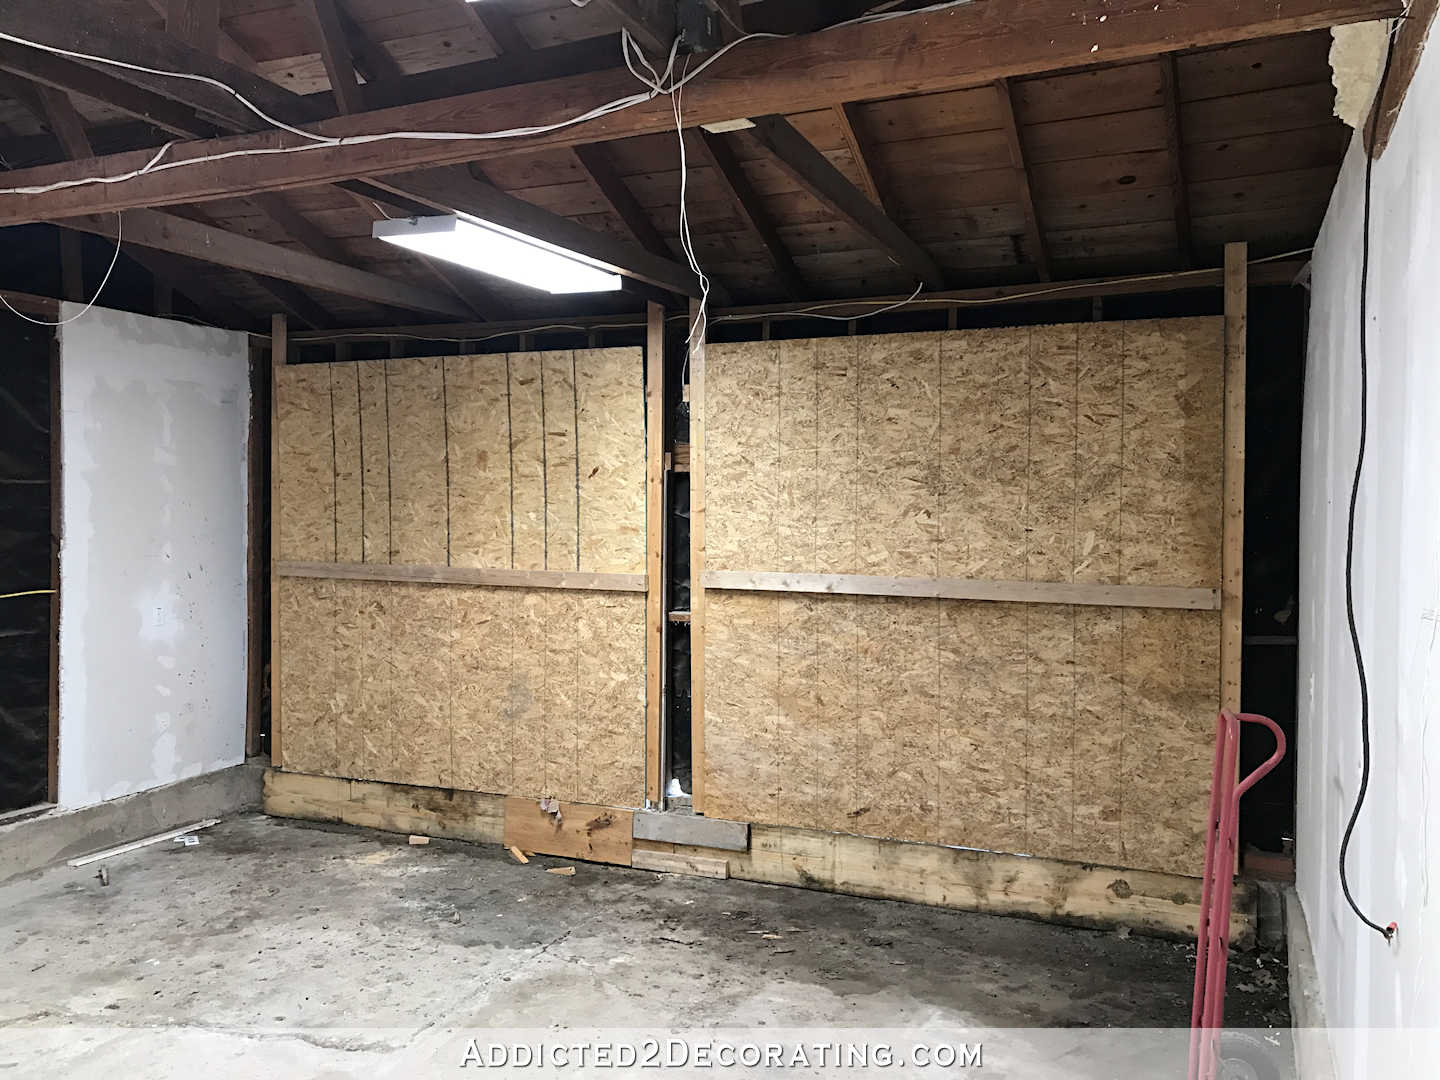 7-1-17 - garage and storage room cleared out - 1